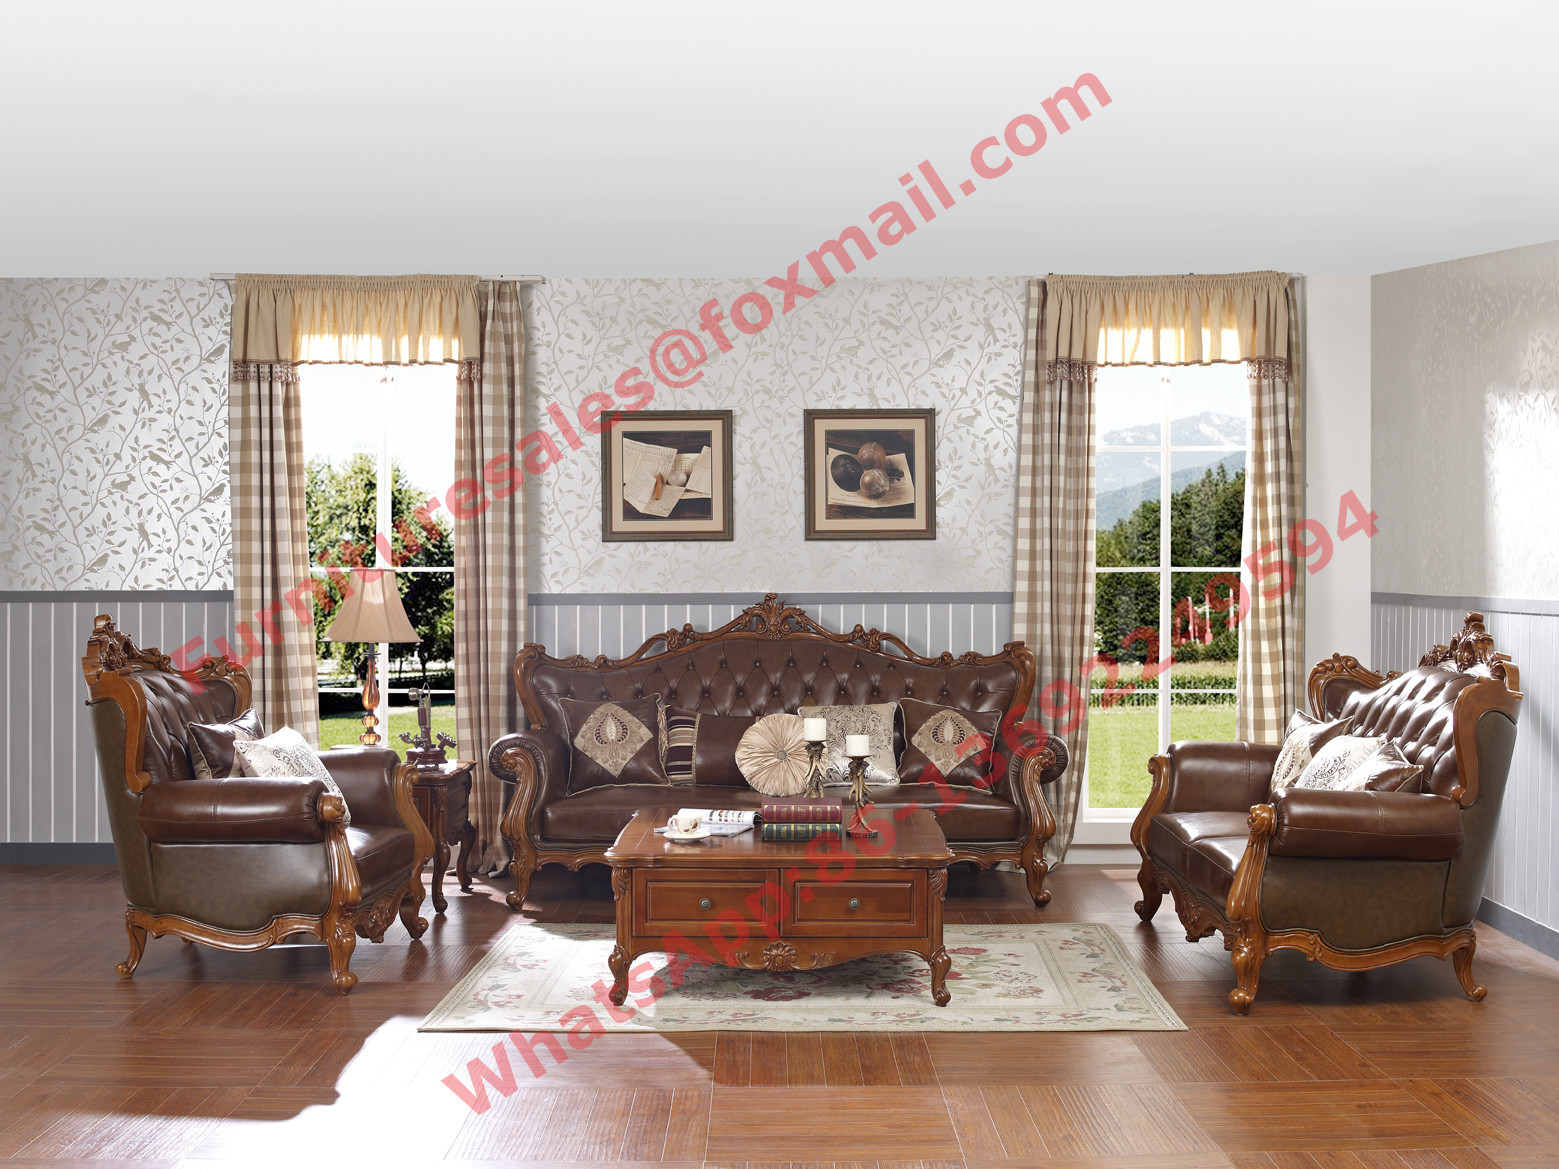 China European Classic Solid Wooden Carving Frame with Italy Leather Upholstery Sofa Set wholesale